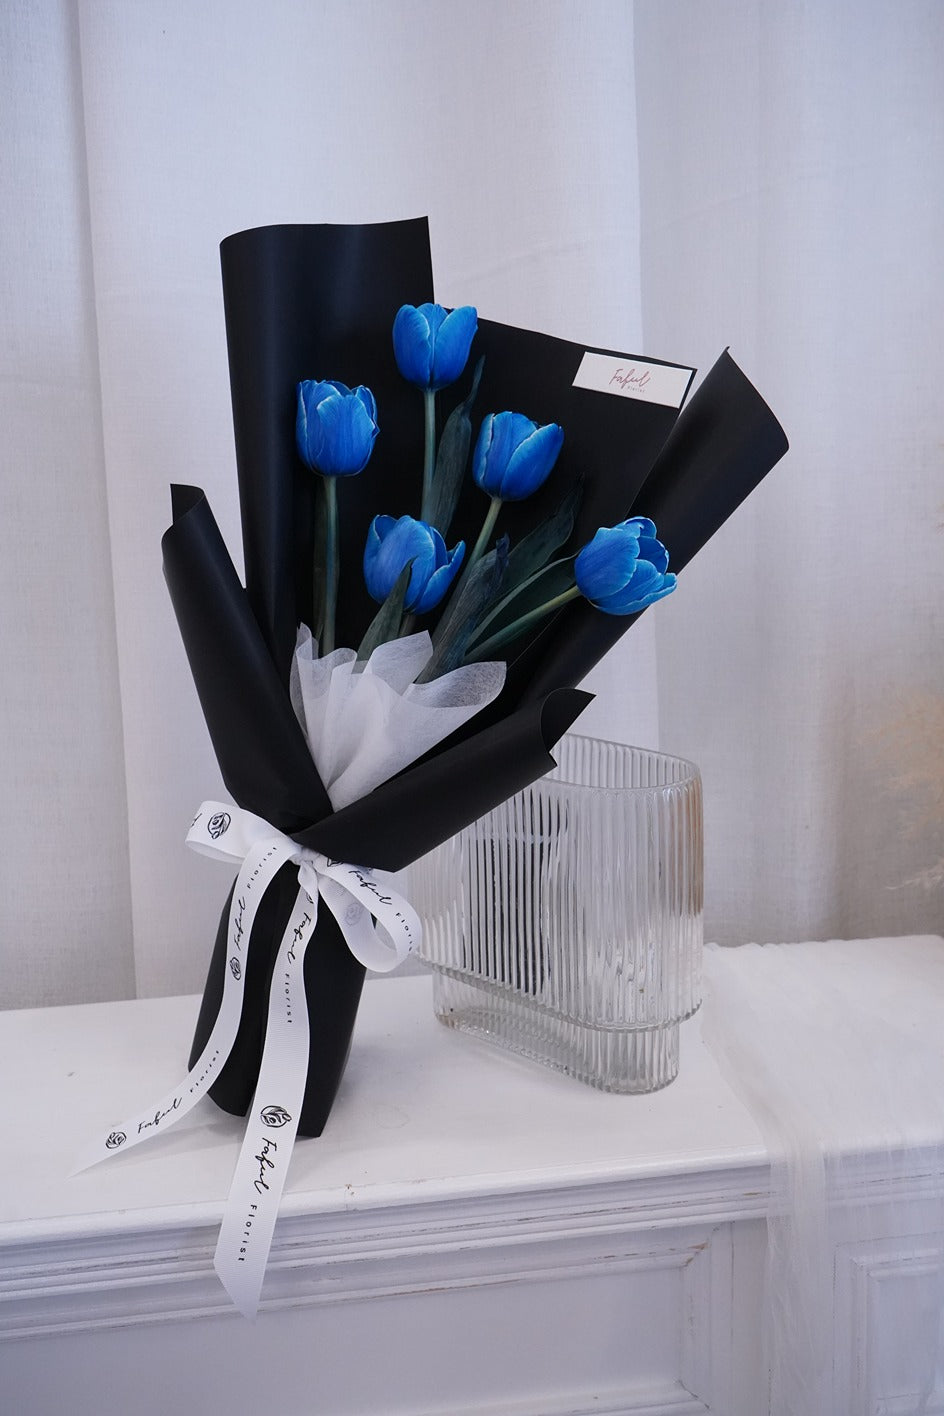 "Delft Blue Tulip Flowers" - A captivating arrangement showcasing Delft blue tulips, perfect flowers for flower delivery in Hong Kong.